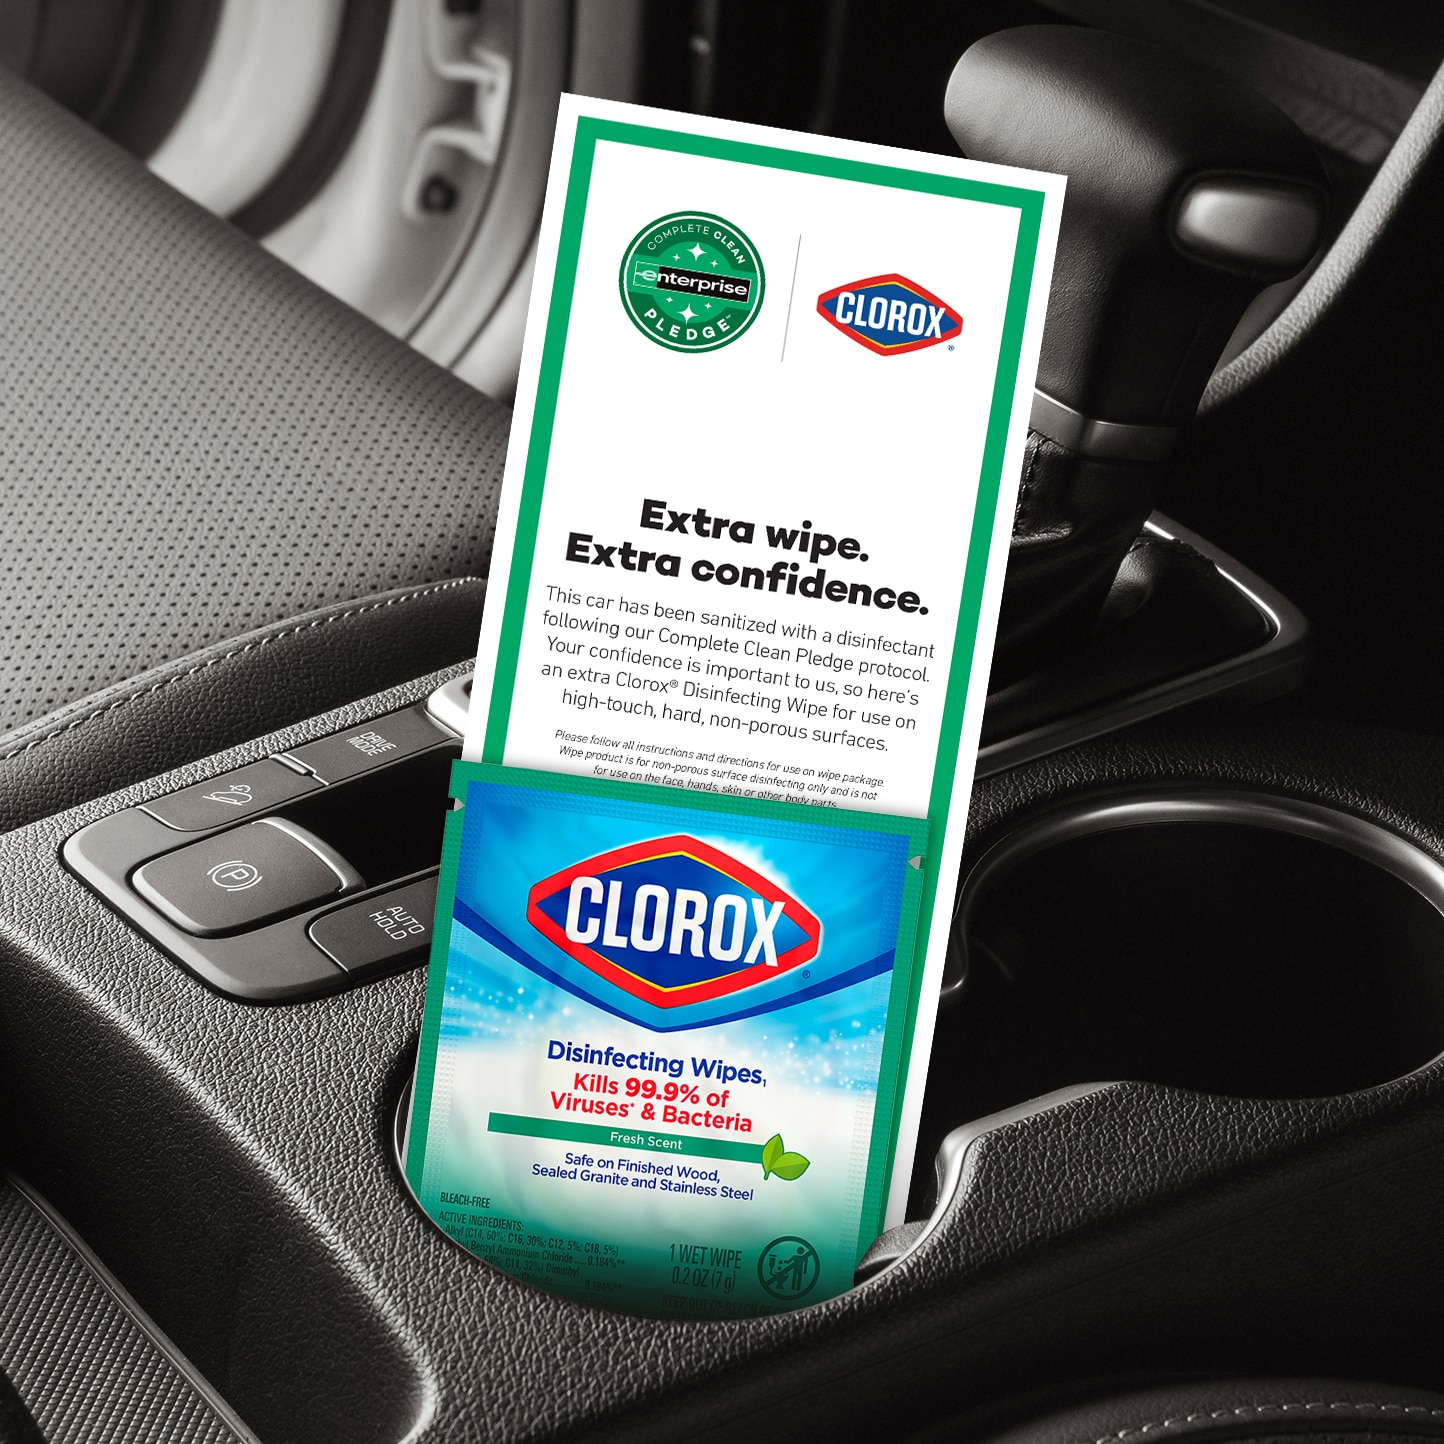 Enterprise Holdings Teams Up with Clorox® Extending its Complete Clean  Pledge; Effort to Offer Industry-First in Car Rental Cleaning Practices and  Customer Control - National Defense Transportation Association